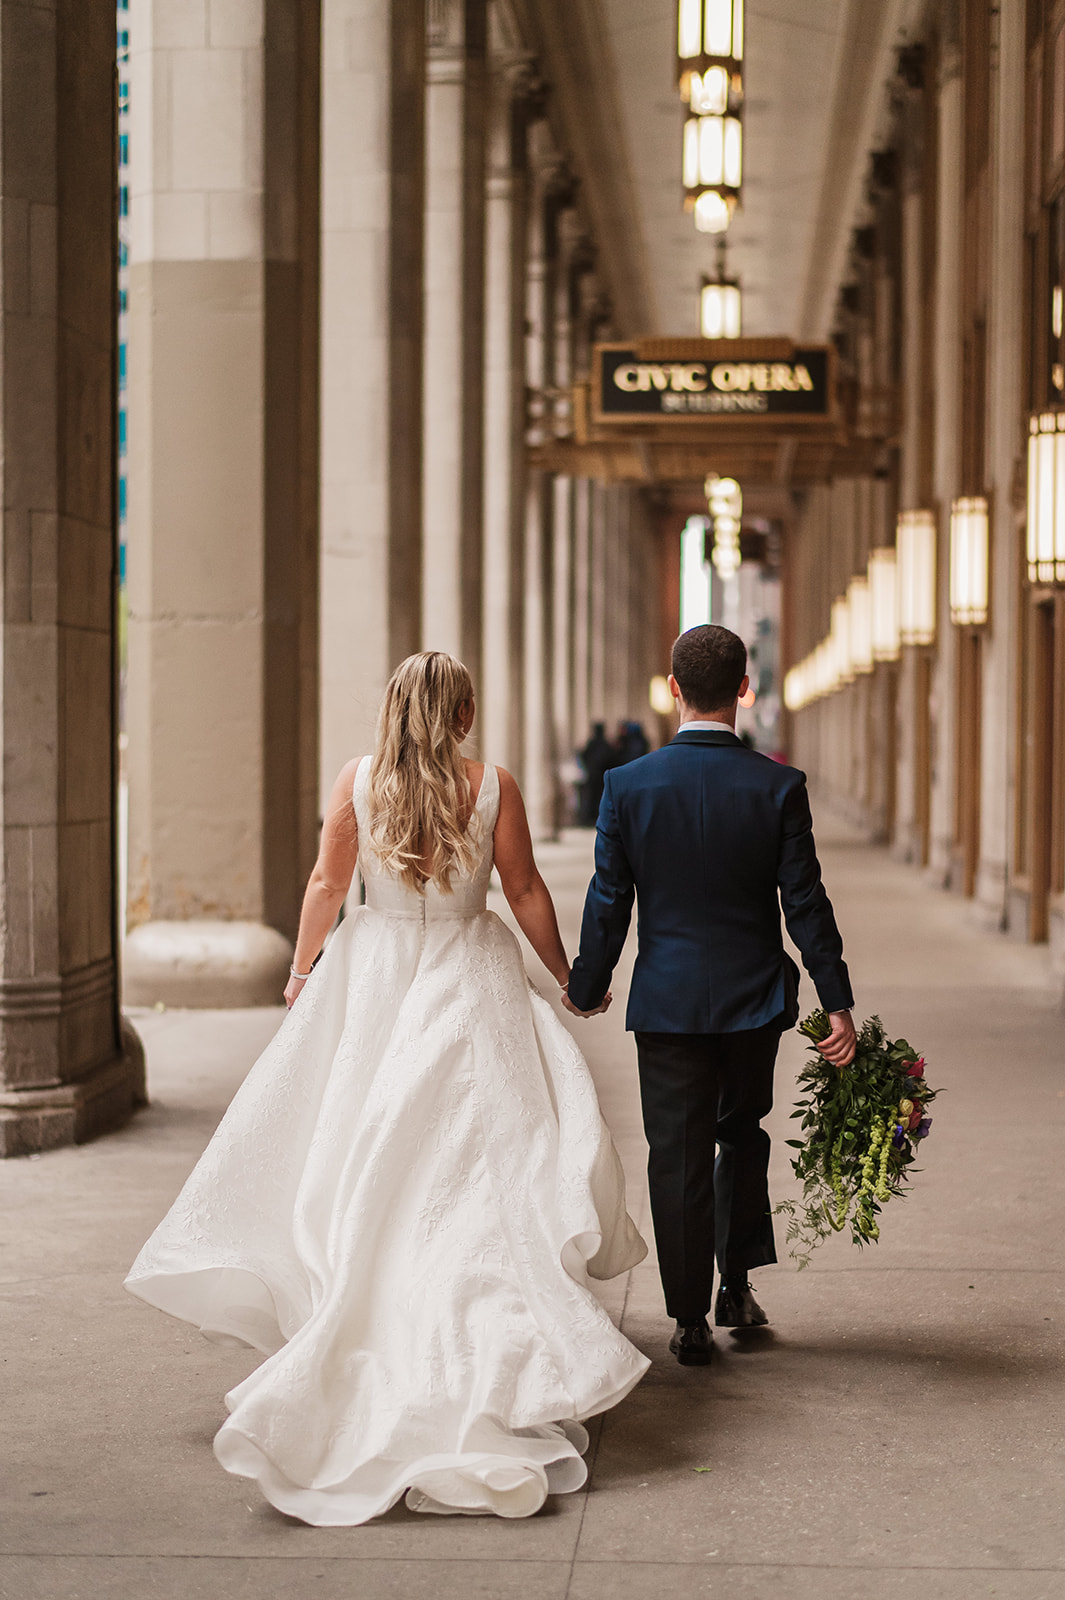 epic bride and groom wedding photos at the Lyric Opera Chicago.